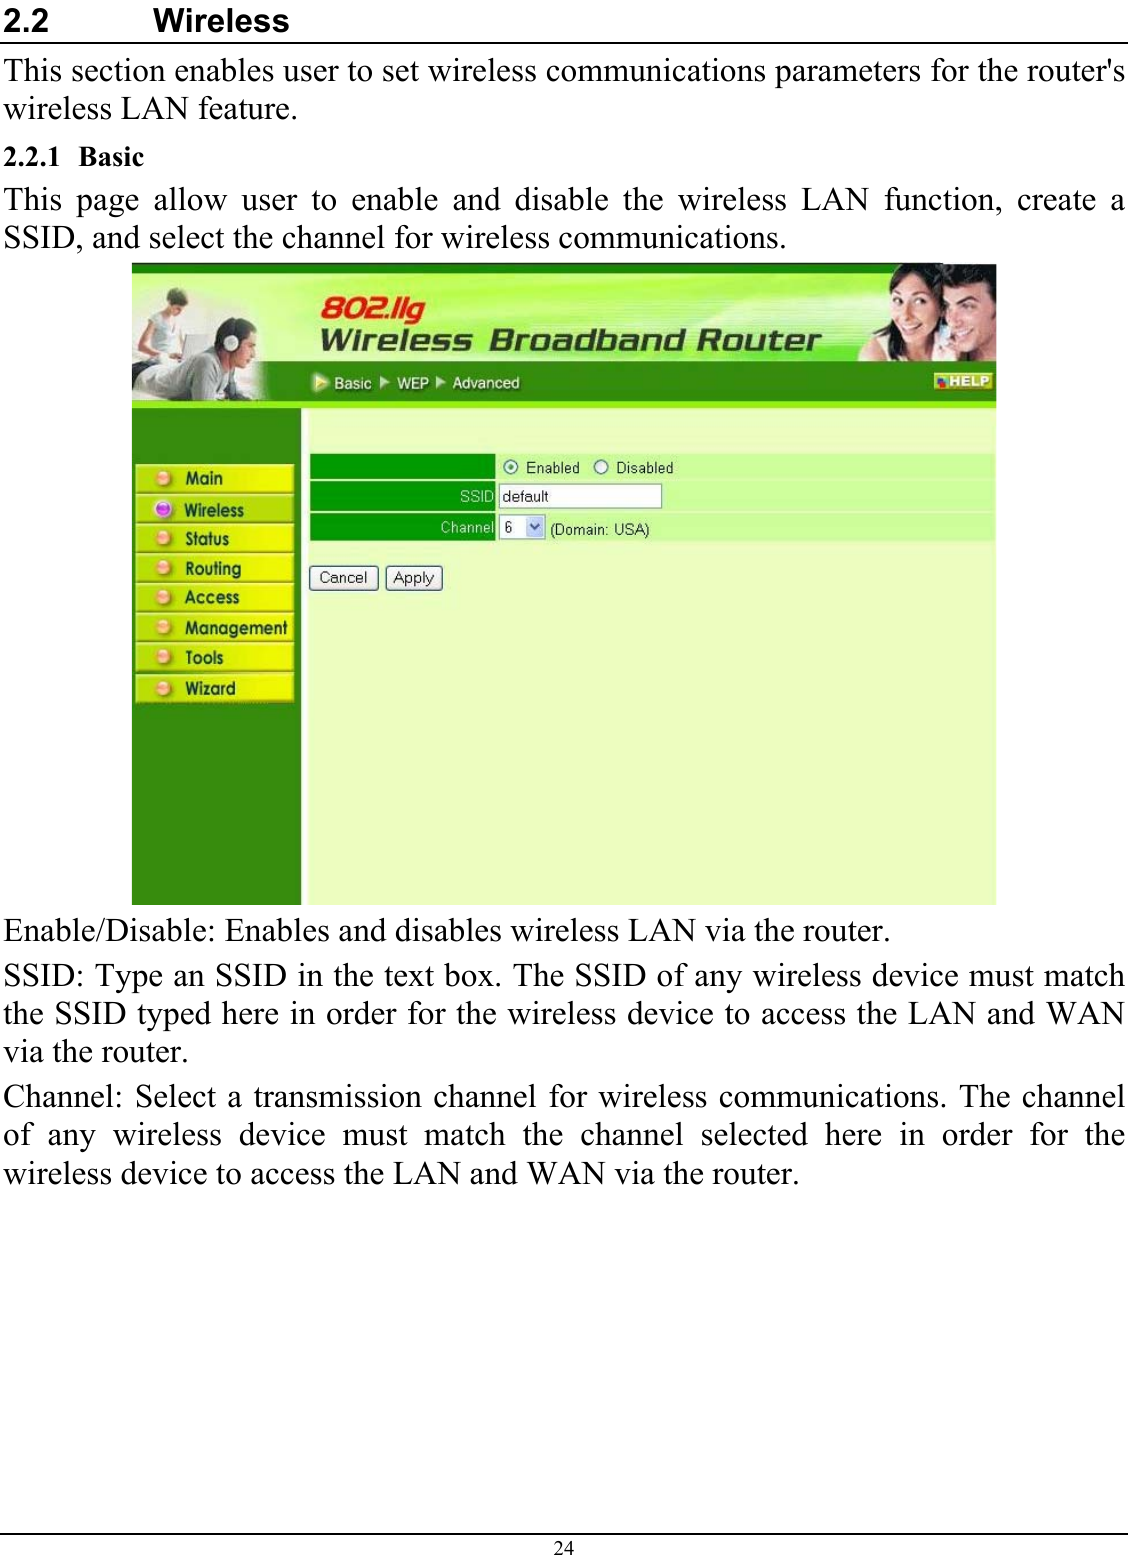 24 2.2   Wireless This section enables user to set wireless communications parameters for the router&apos;s wireless LAN feature. 2.2.1 Basic This page allow user to enable and disable the wireless LAN function, create a SSID, and select the channel for wireless communications.  Enable/Disable: Enables and disables wireless LAN via the router. SSID: Type an SSID in the text box. The SSID of any wireless device must match the SSID typed here in order for the wireless device to access the LAN and WAN via the router. Channel: Select a transmission channel for wireless communications. The channel of any wireless device must match the channel selected here in order for the wireless device to access the LAN and WAN via the router. 